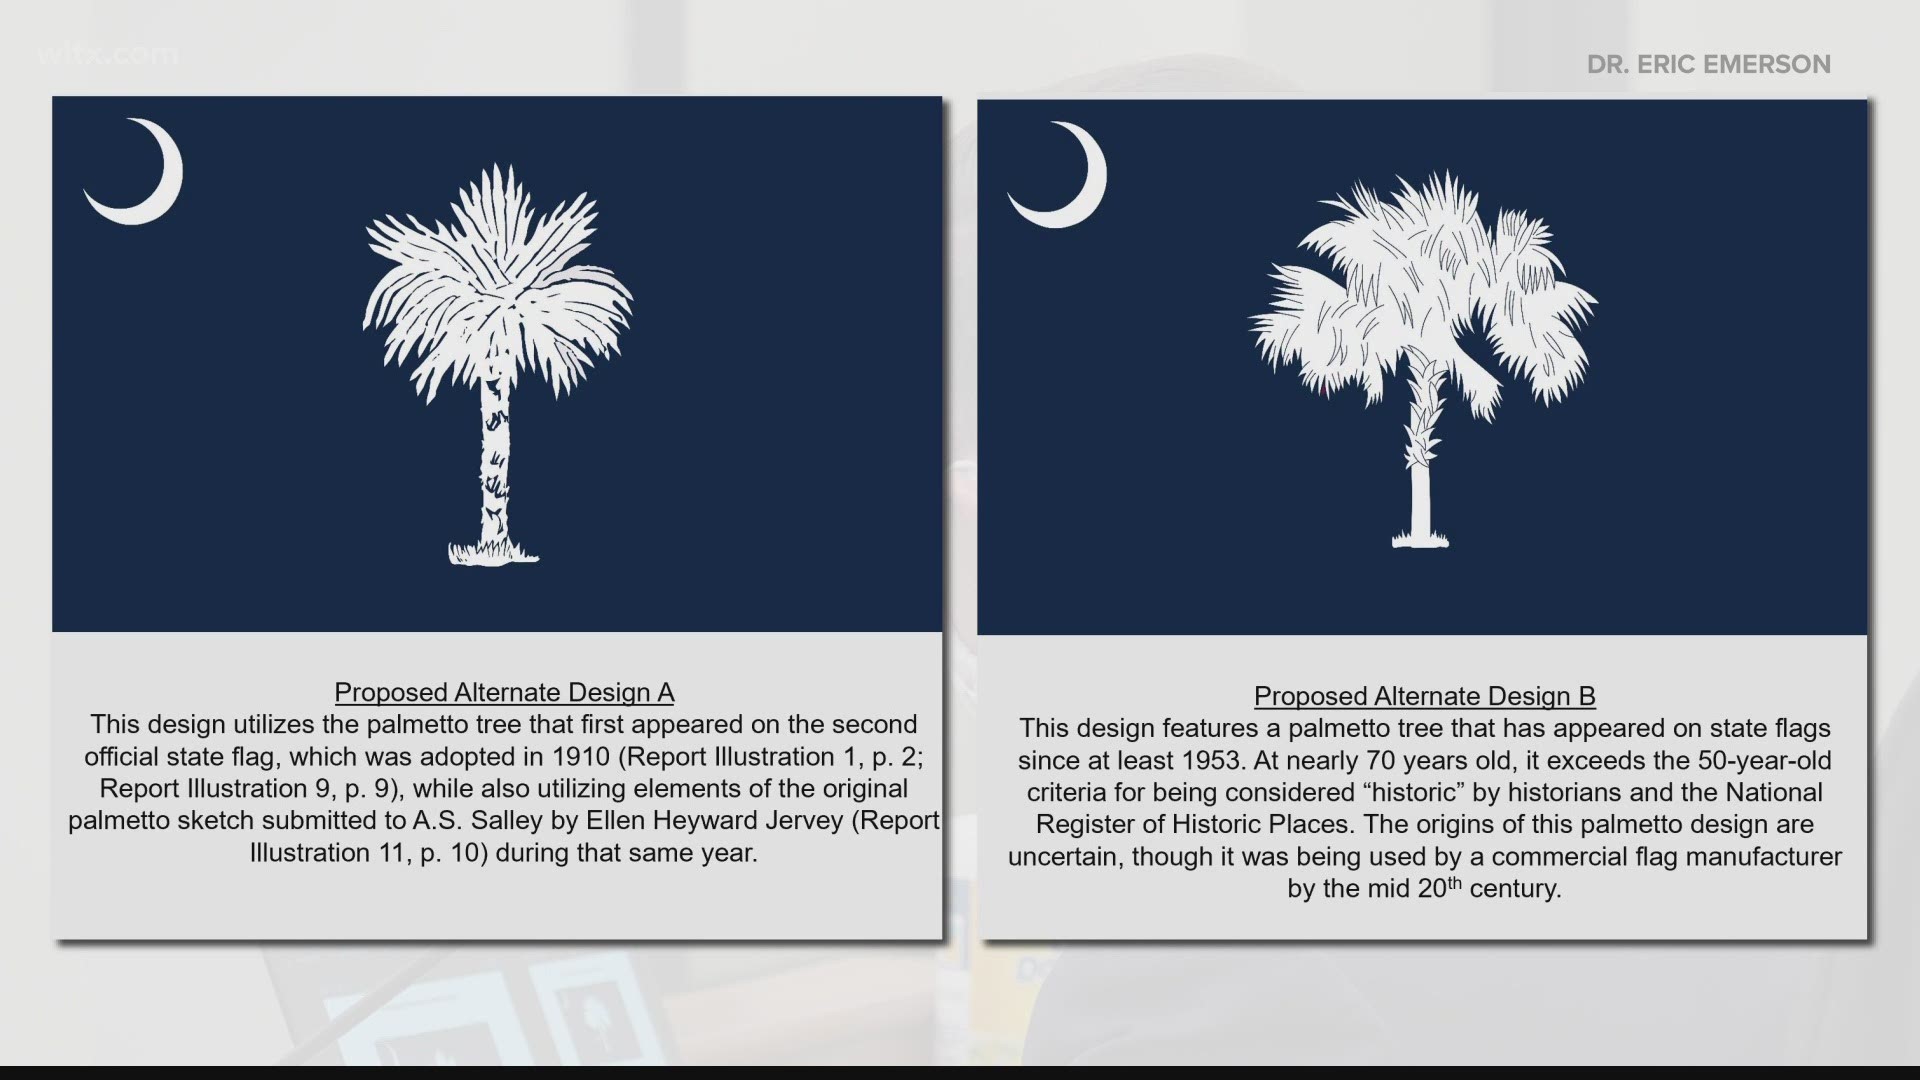 There are several different versions of South Carolina's state flag, and lawmakers are hoping to choose one design to become the official standard.